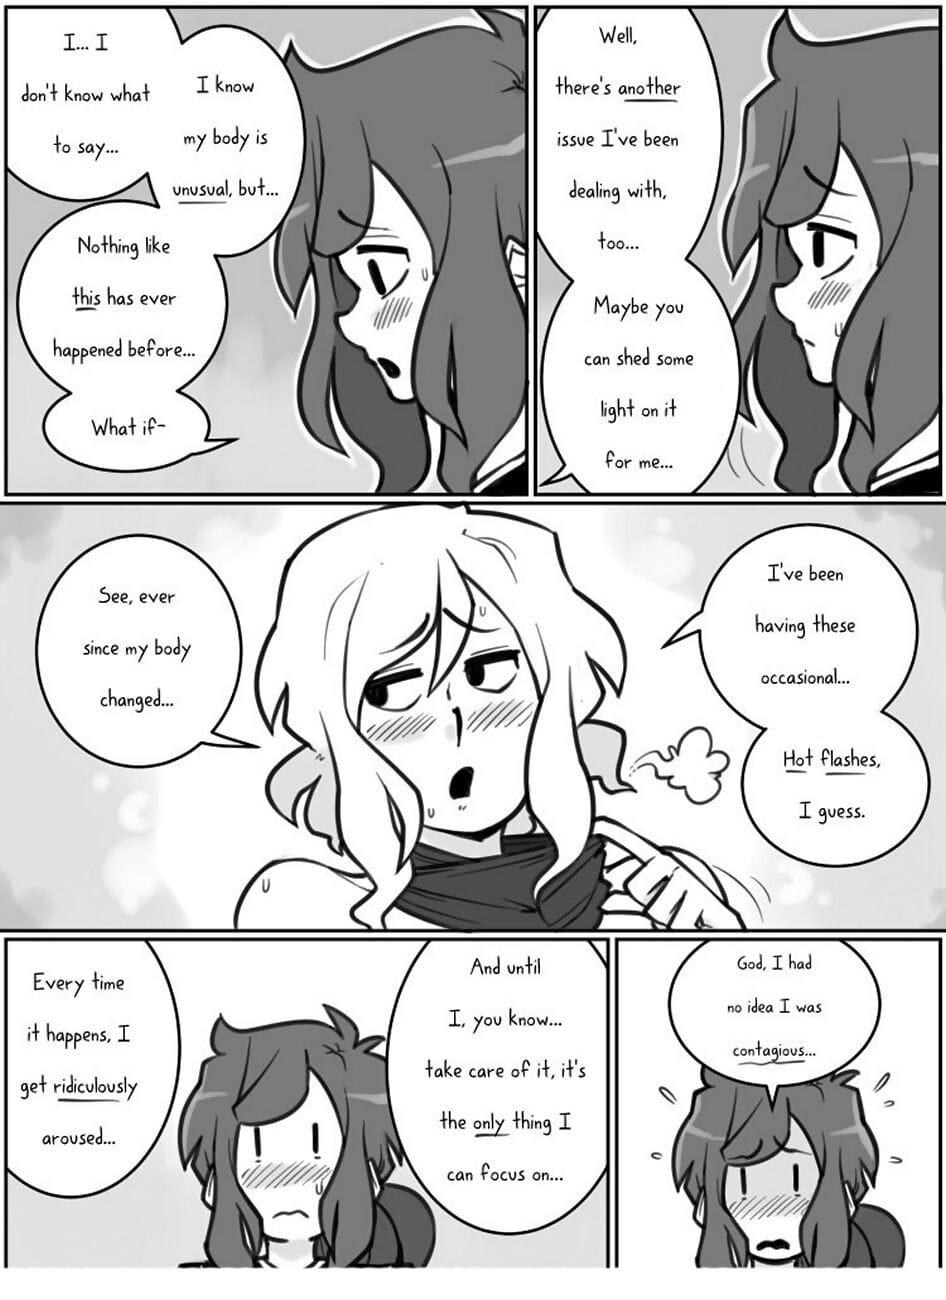 The Key To Her Heart 30 - Strange Side Eâ€¦ page 1